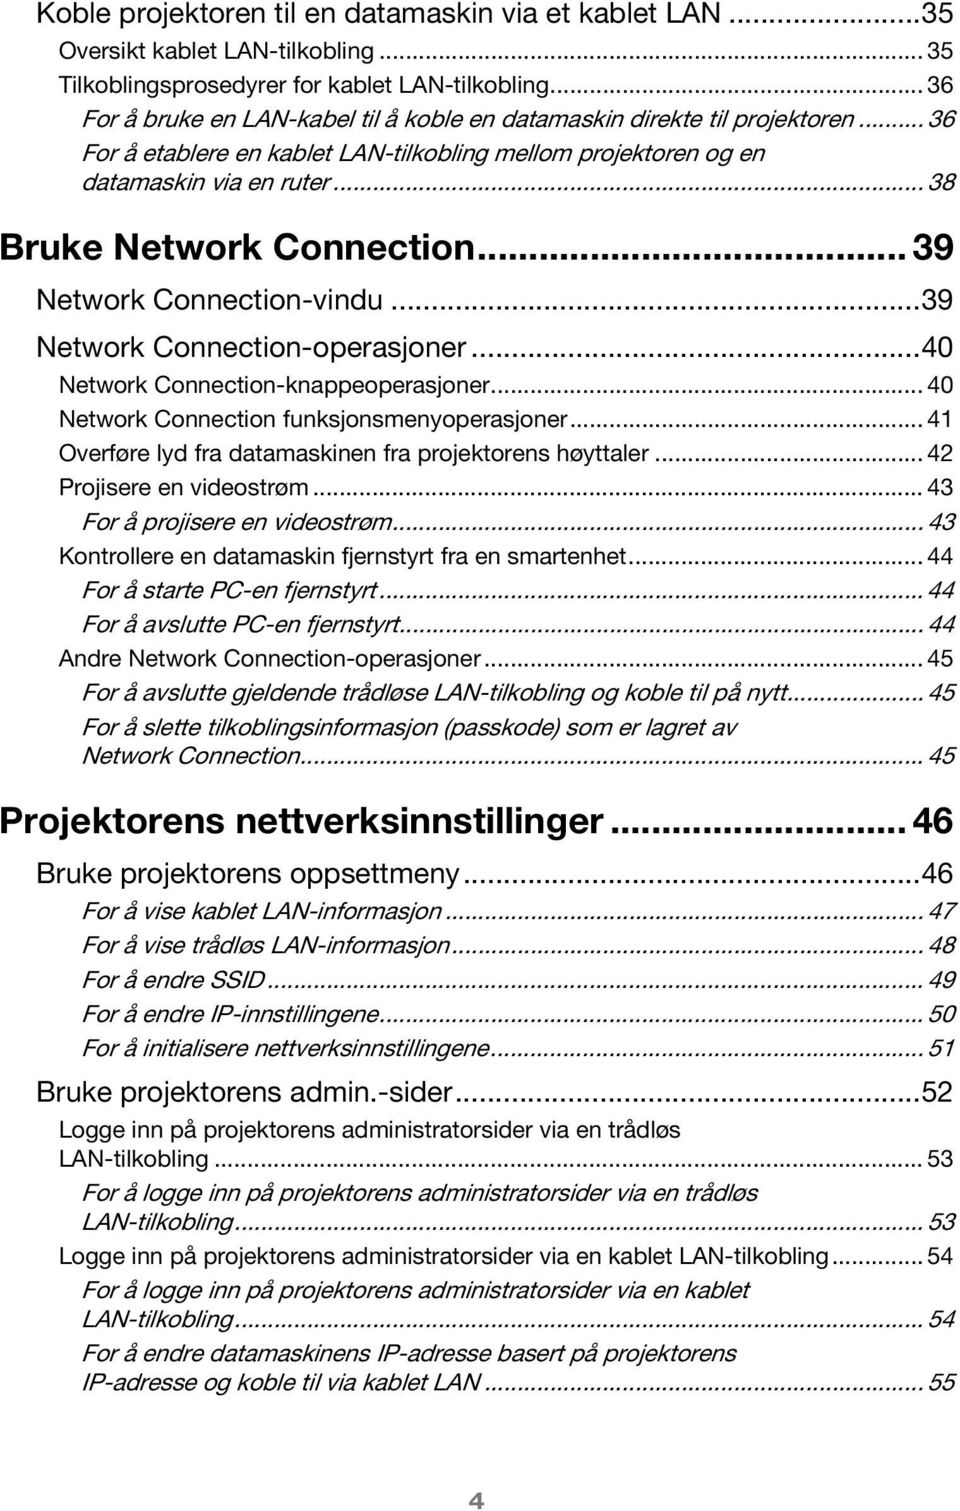 .. 38 Bruke Network Connection... 39 Network Connection-vindu...39 Network Connection-operasjoner...40 Network Connection-knappeoperasjoner... 40 Network Connection funksjonsmenyoperasjoner.